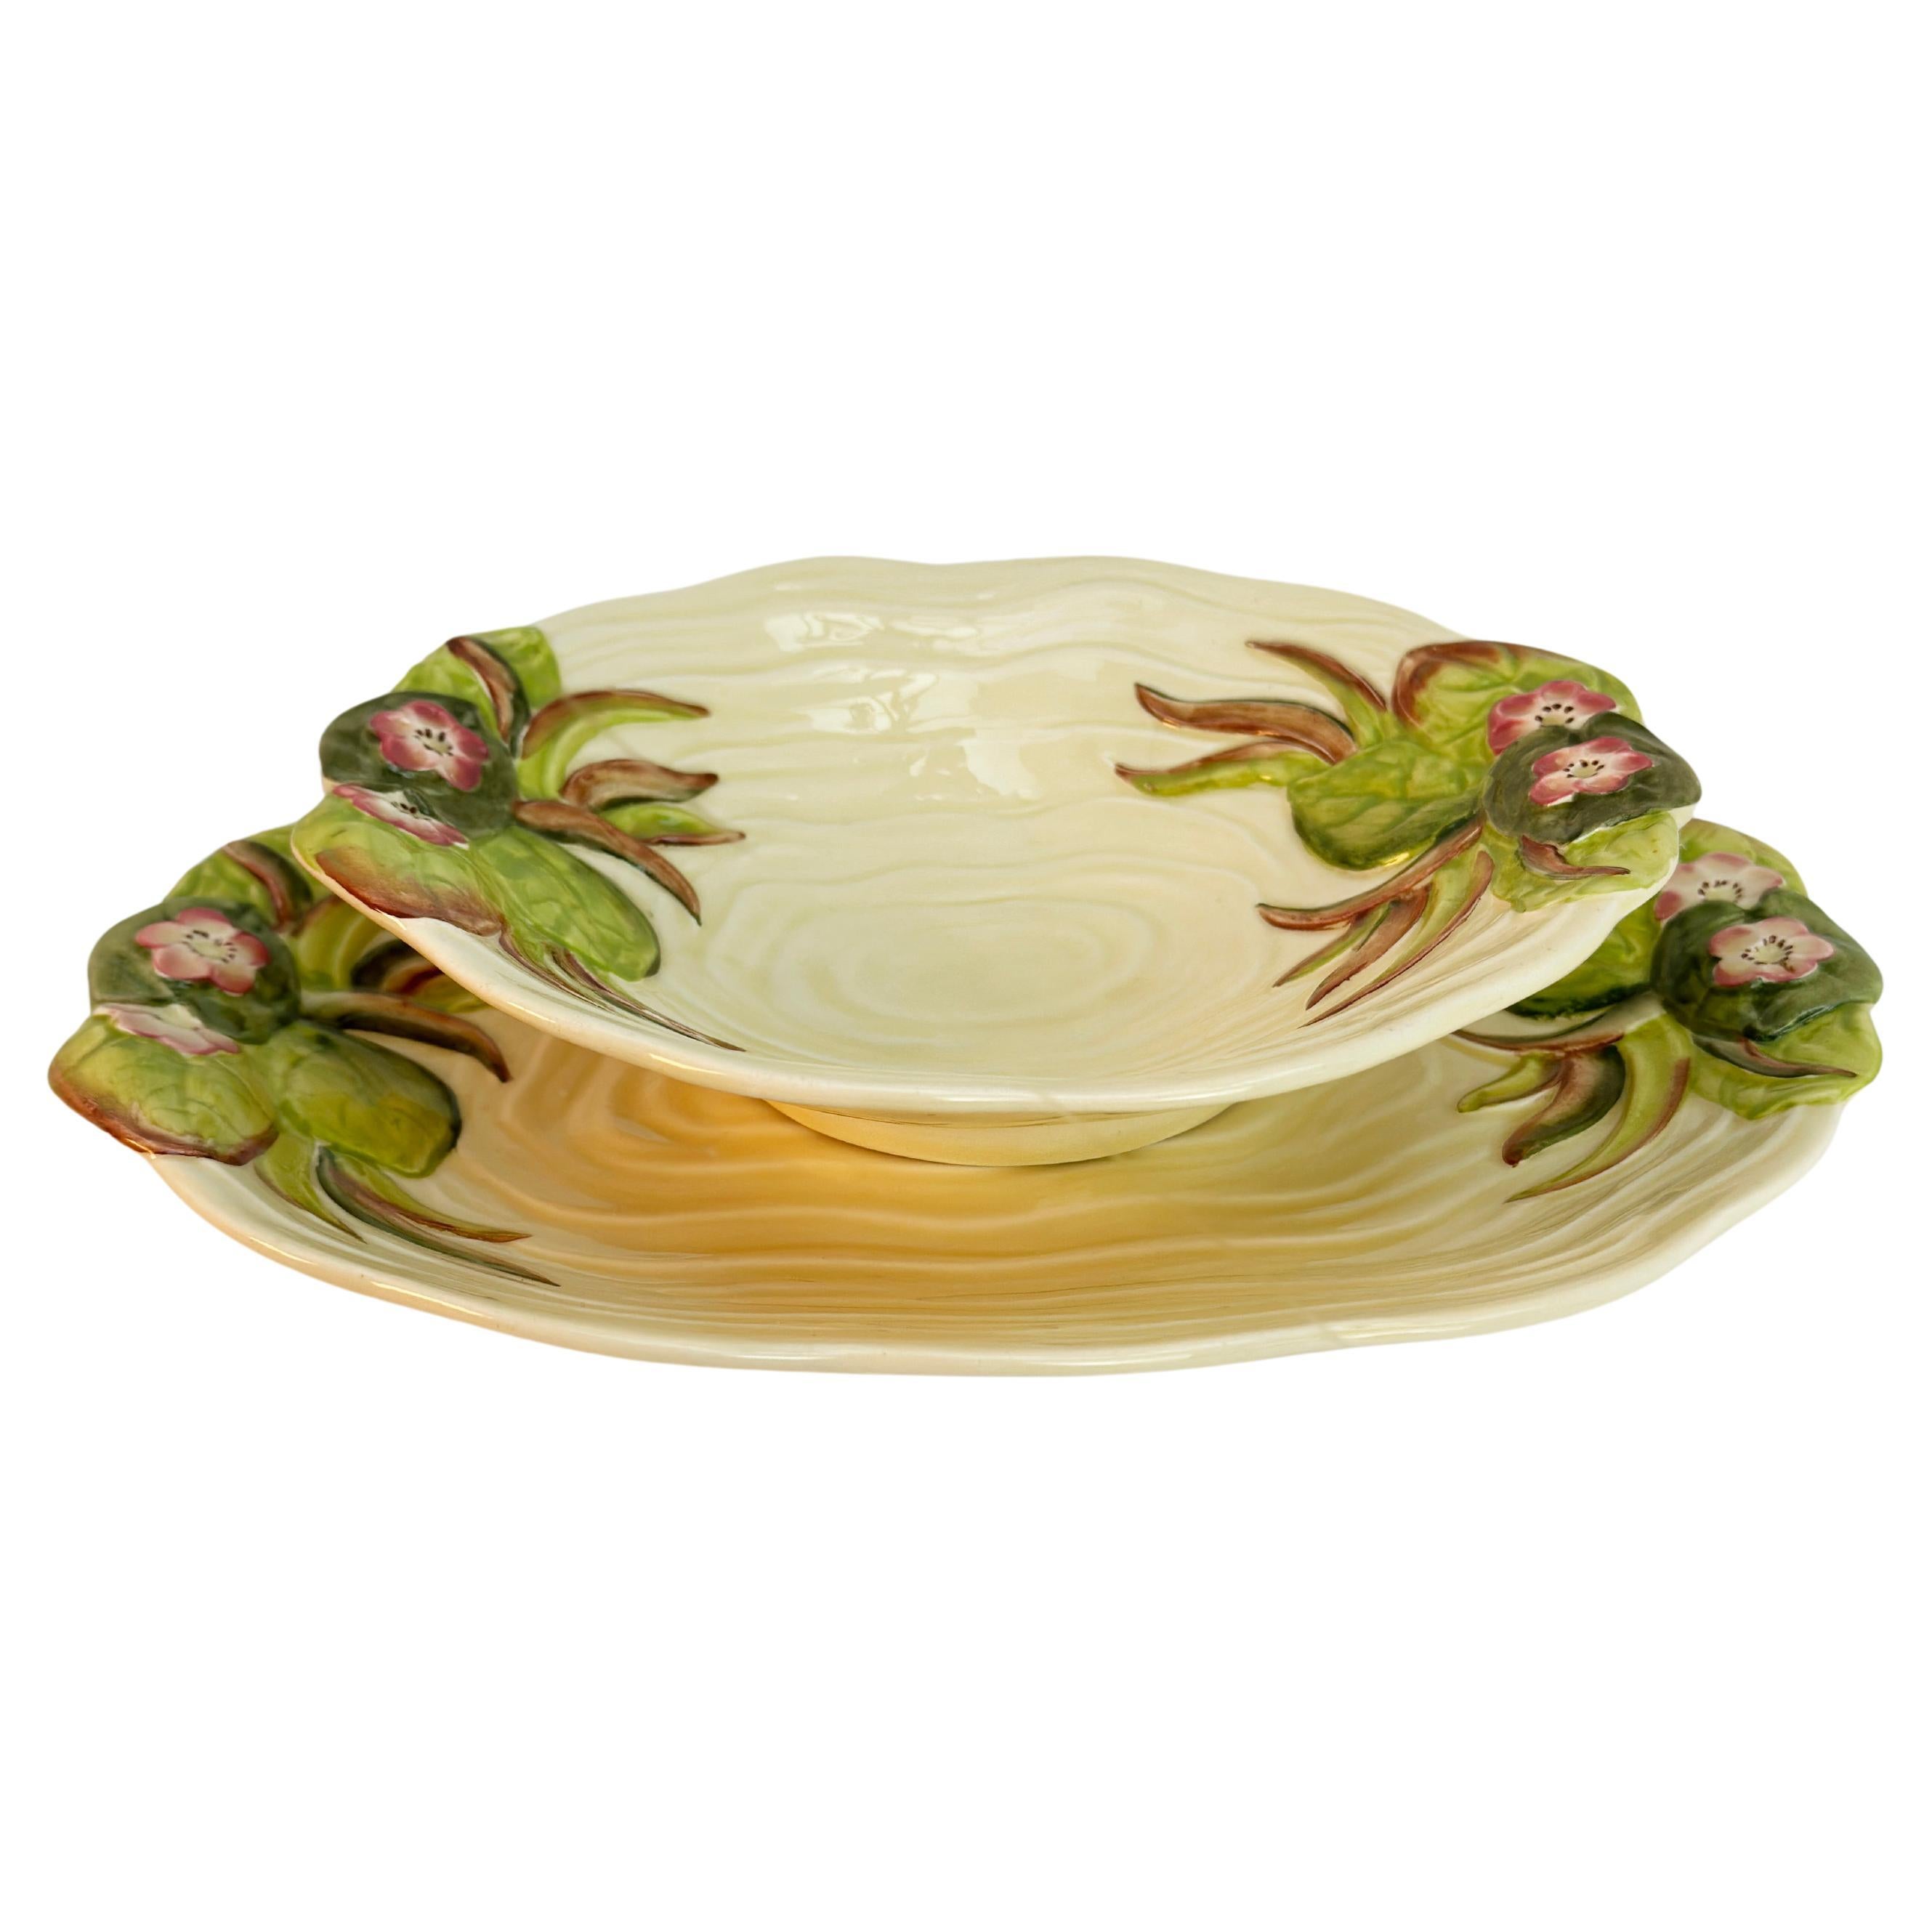 Clarice Cliff Water Lily Porcelain Dish and Platter Newport Pottery 